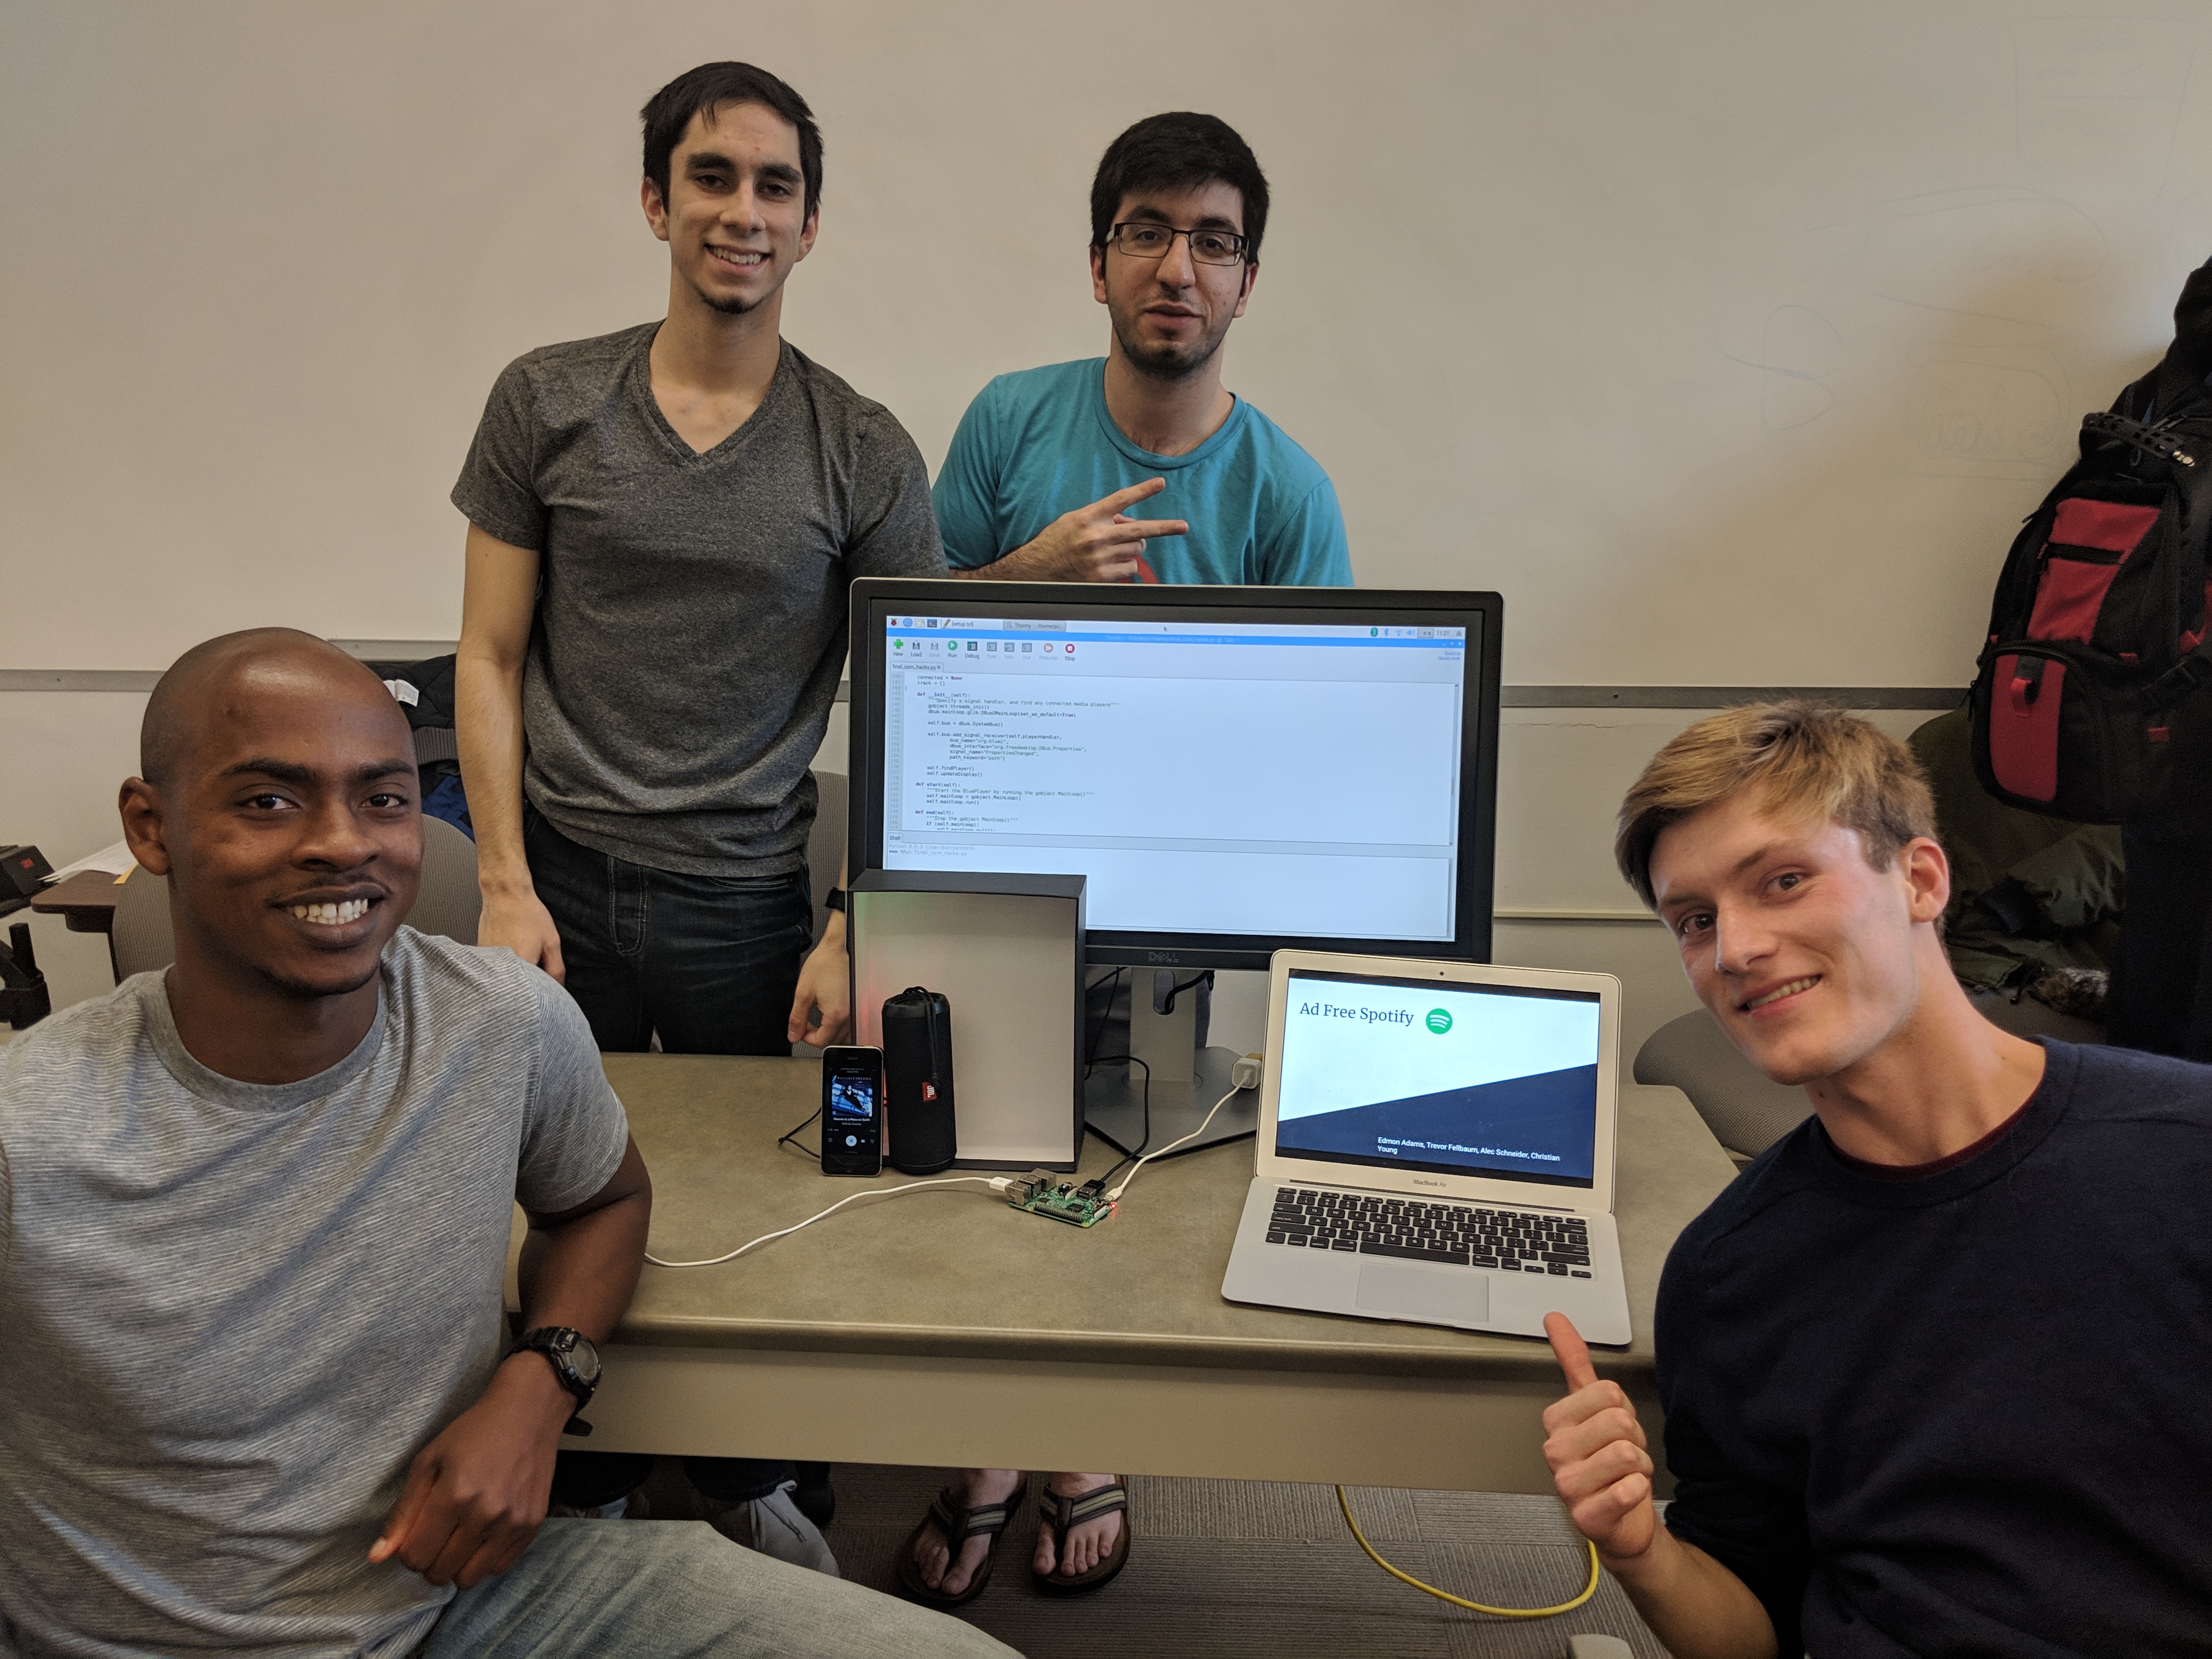 The first place winning CornHacks team, Ad-Free Spotify. Members from left to right: Christian Young, Trevor Fellbaum, Edmon Adams, and Alec Schneider.